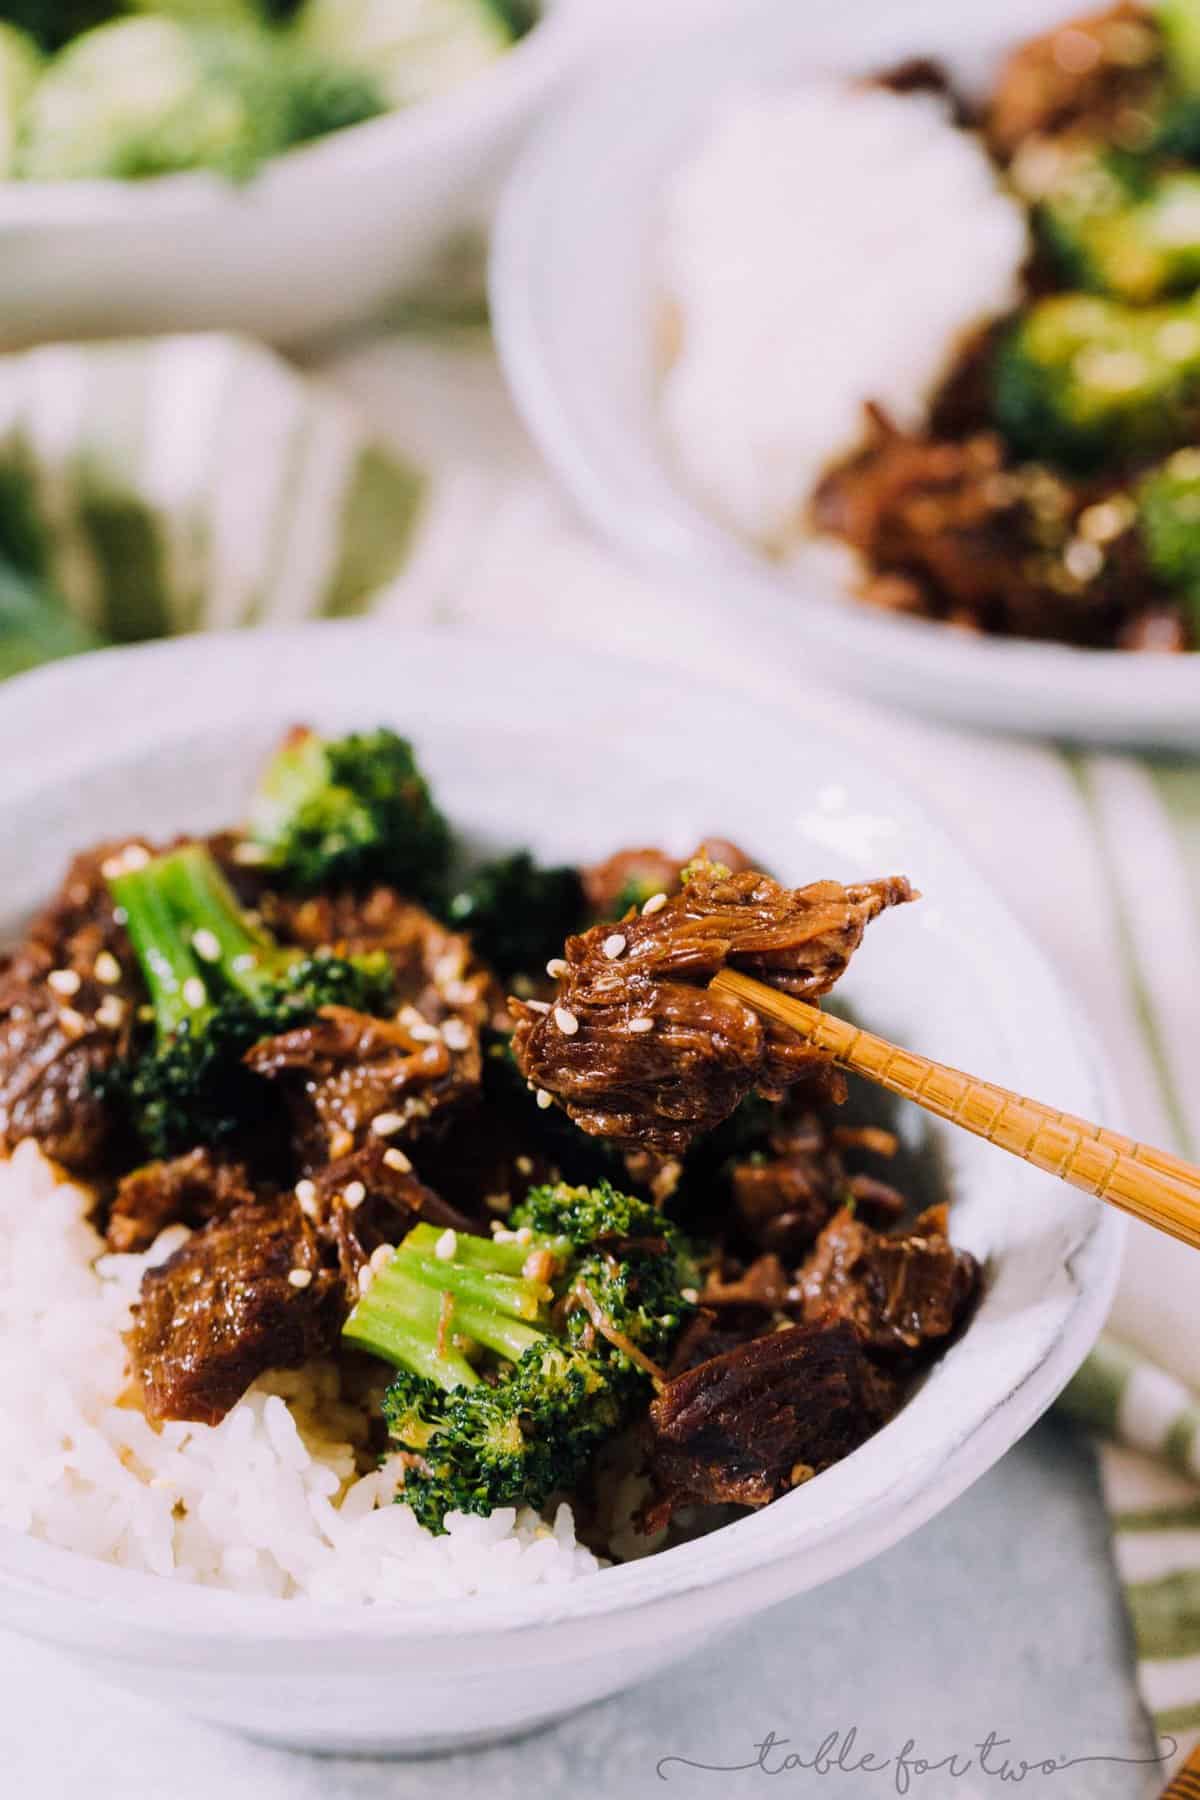 An Instant Pot (pressure cooker) version of the classic beef and broccoli that everyone loves!